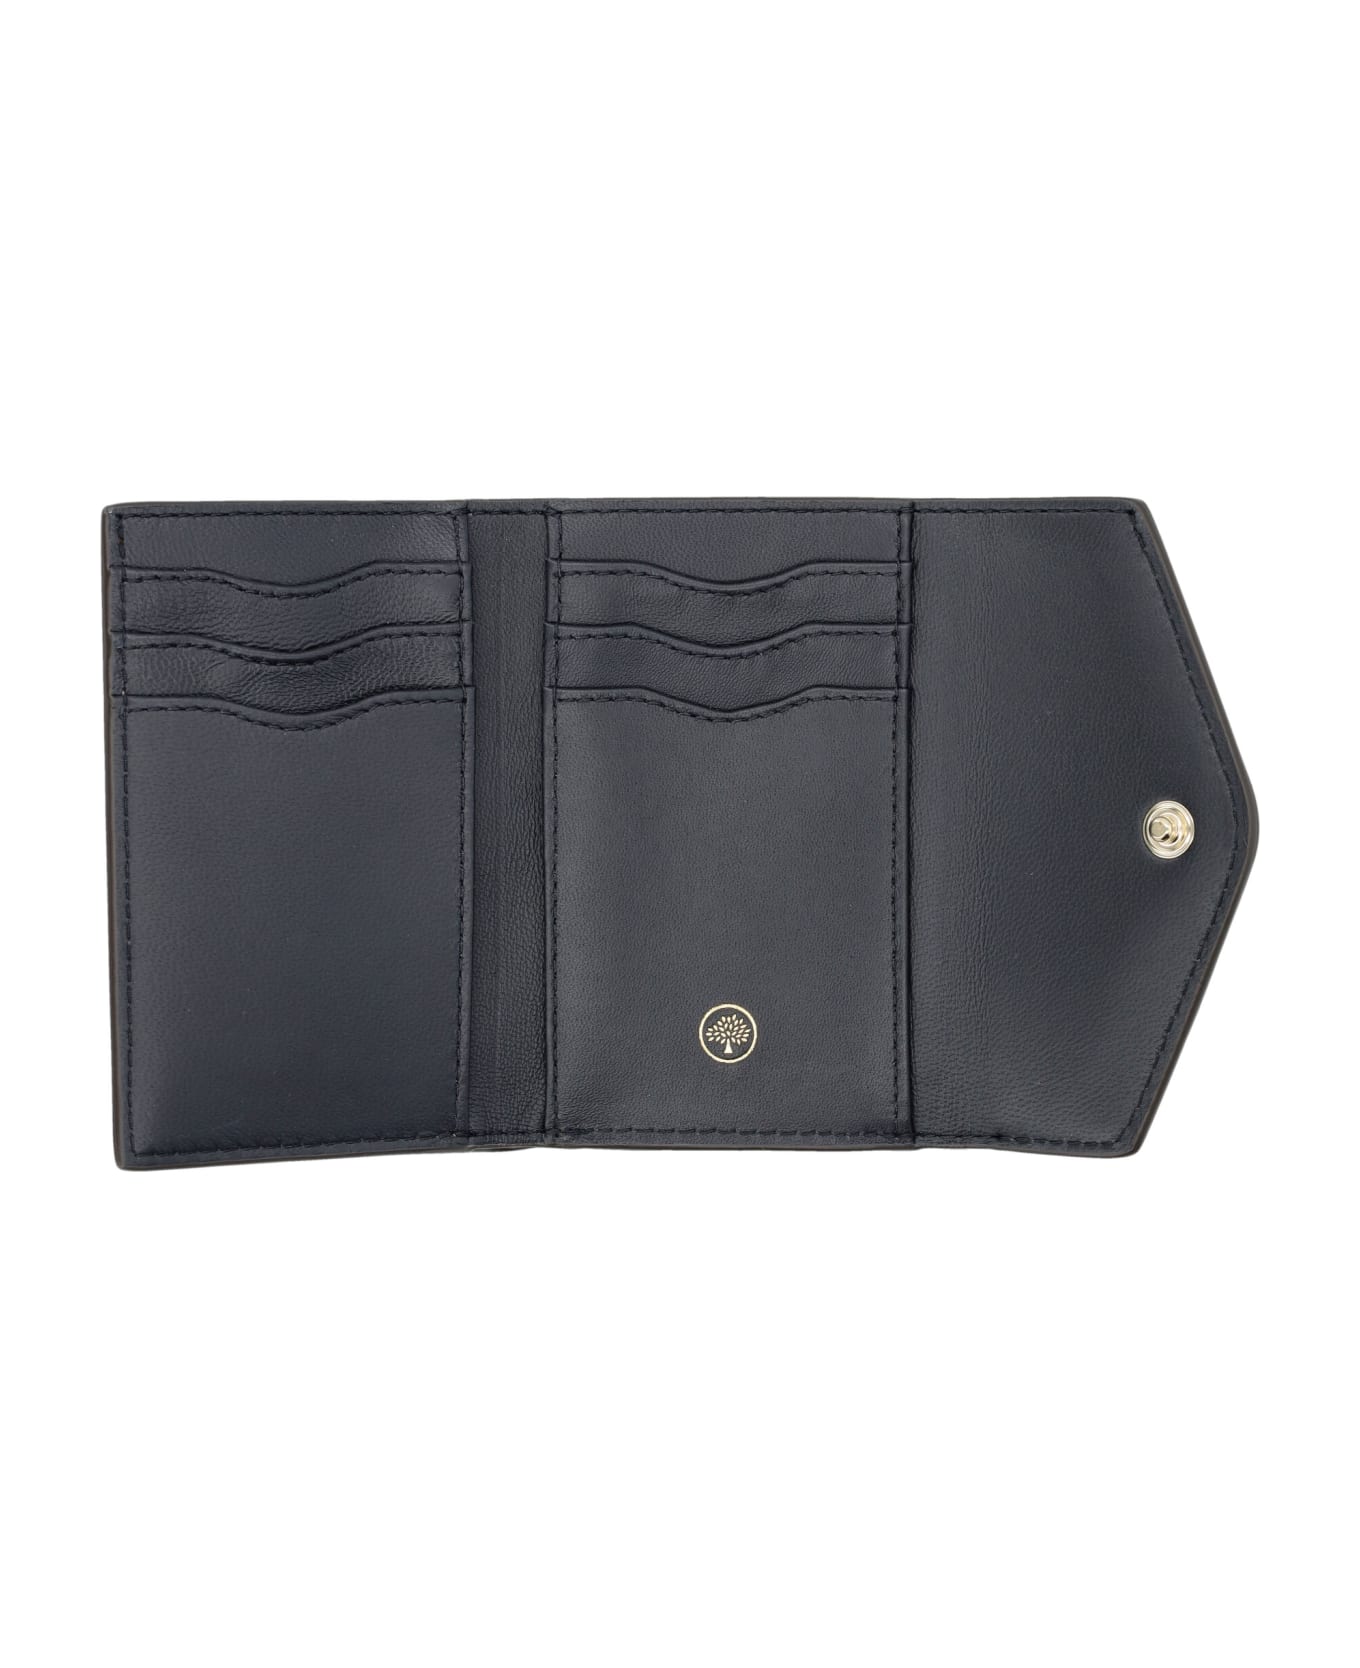 Mulberry Folded Multi-card Wallet - CHESTNUT 財布